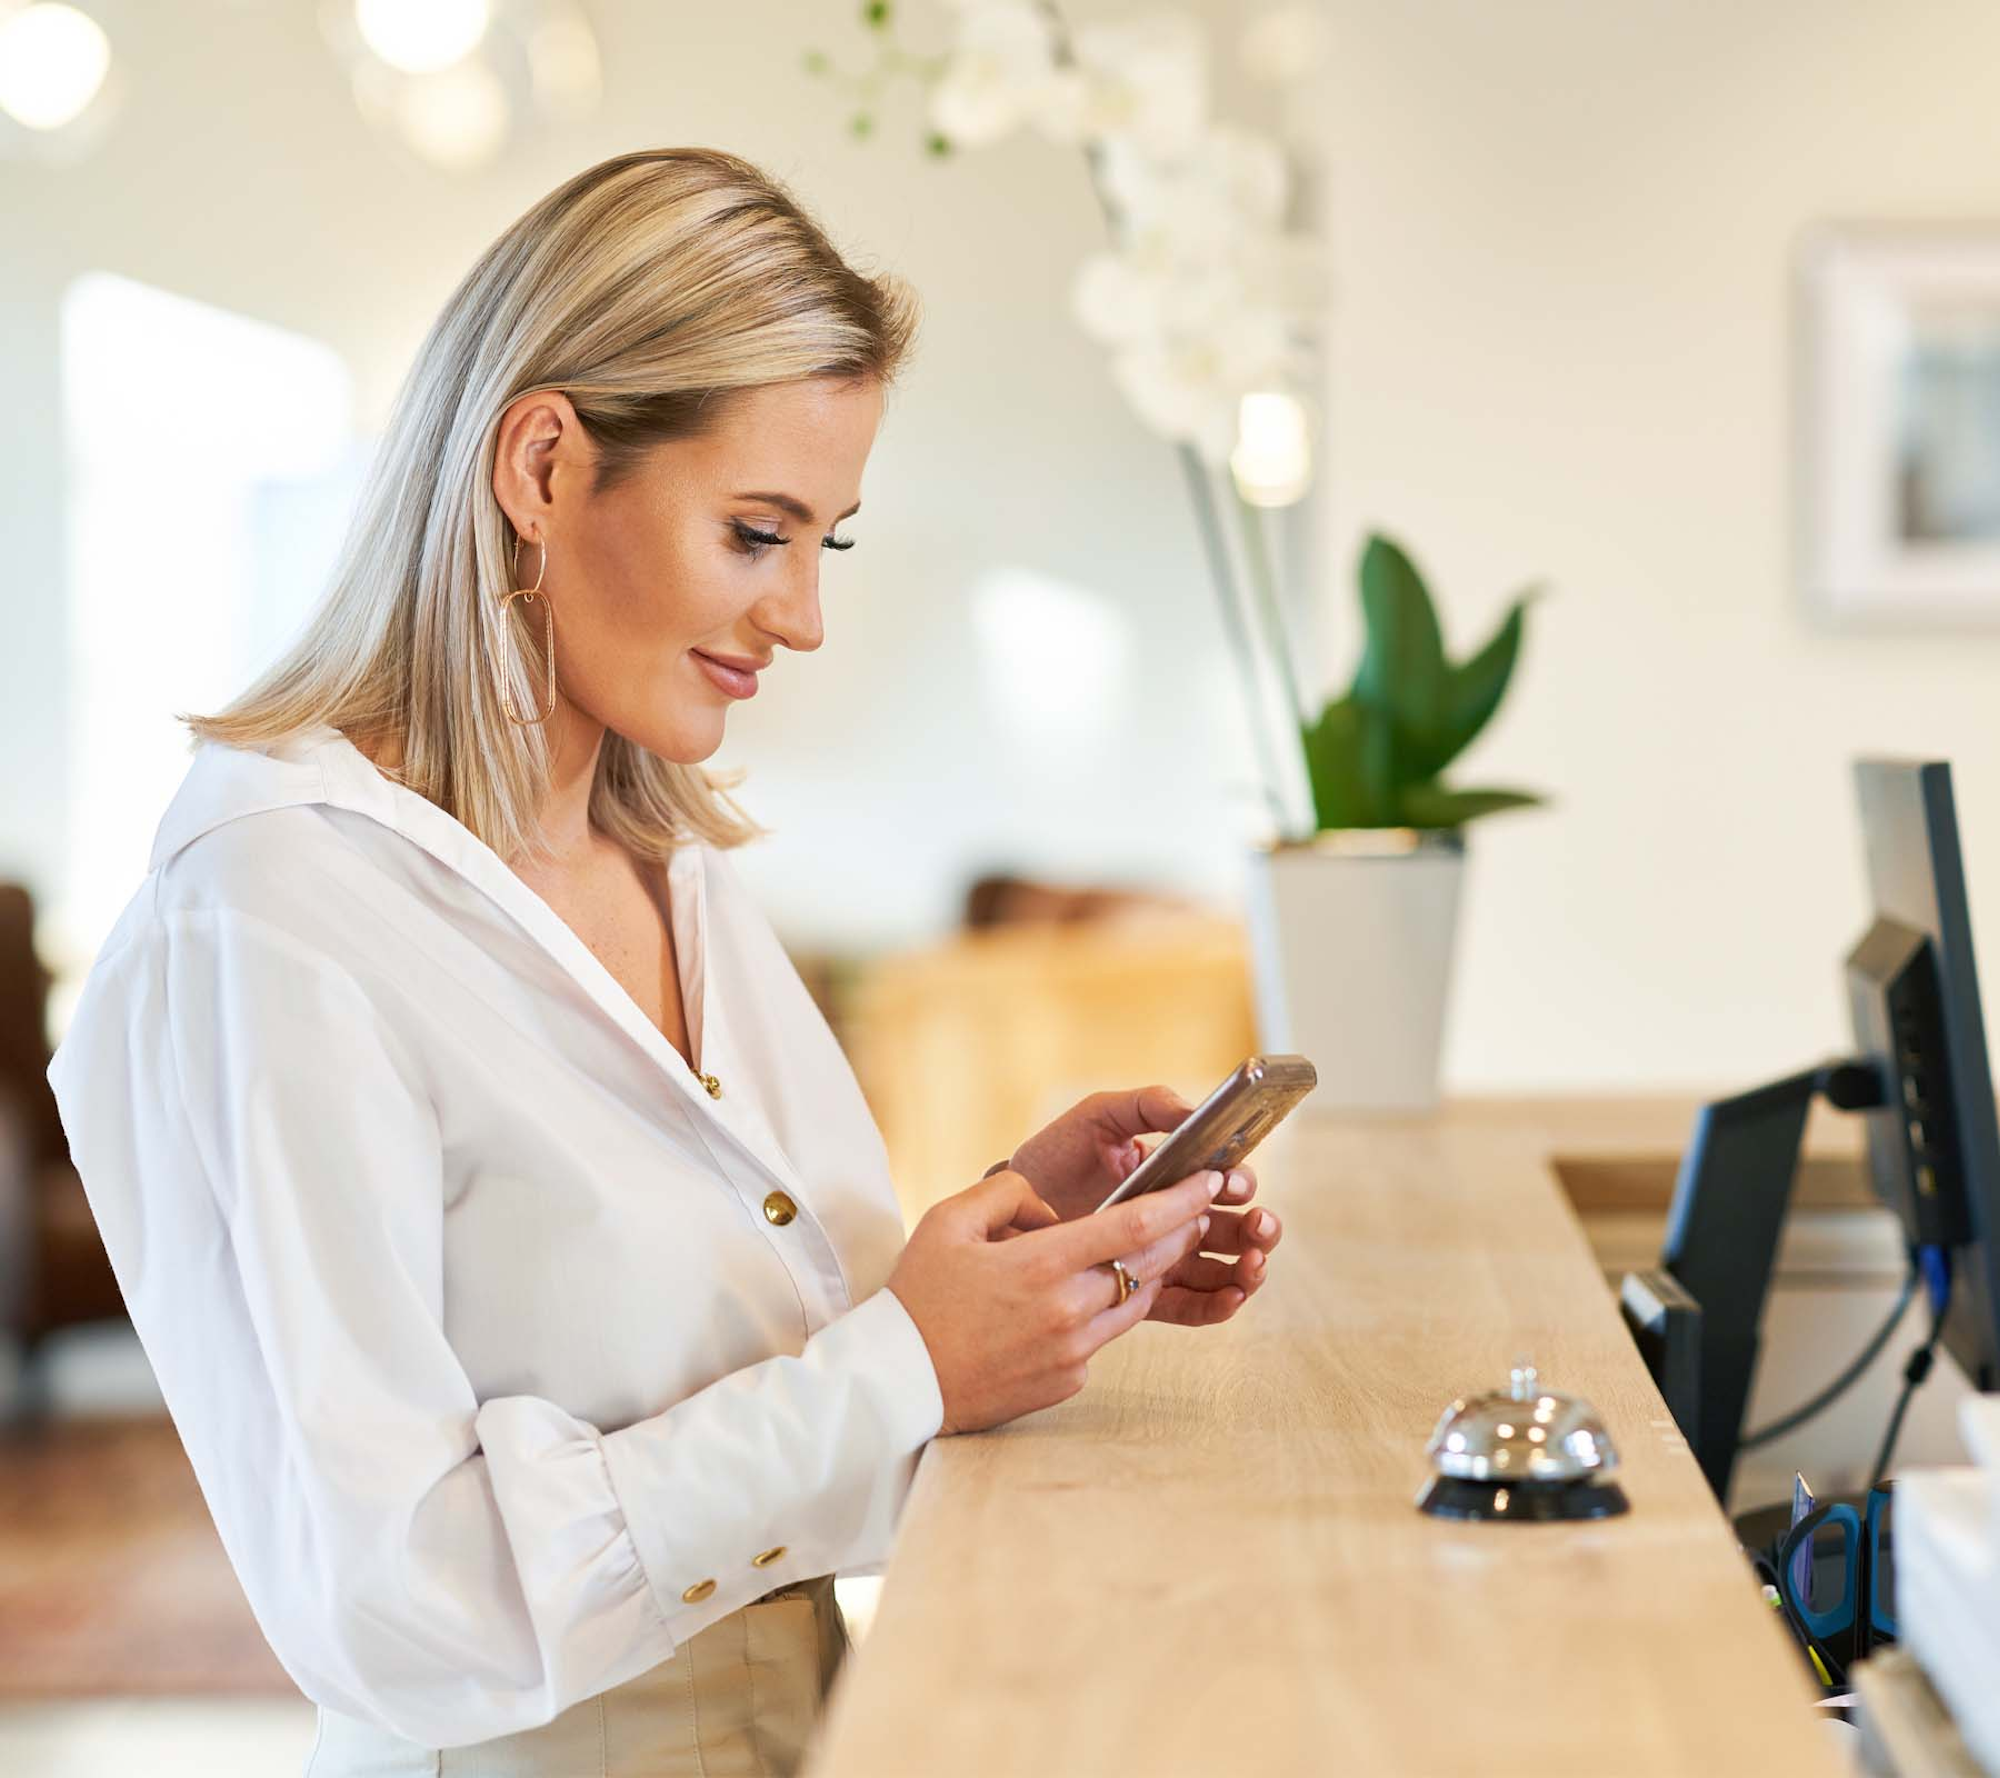 Woman at reception desk on her phone smiling